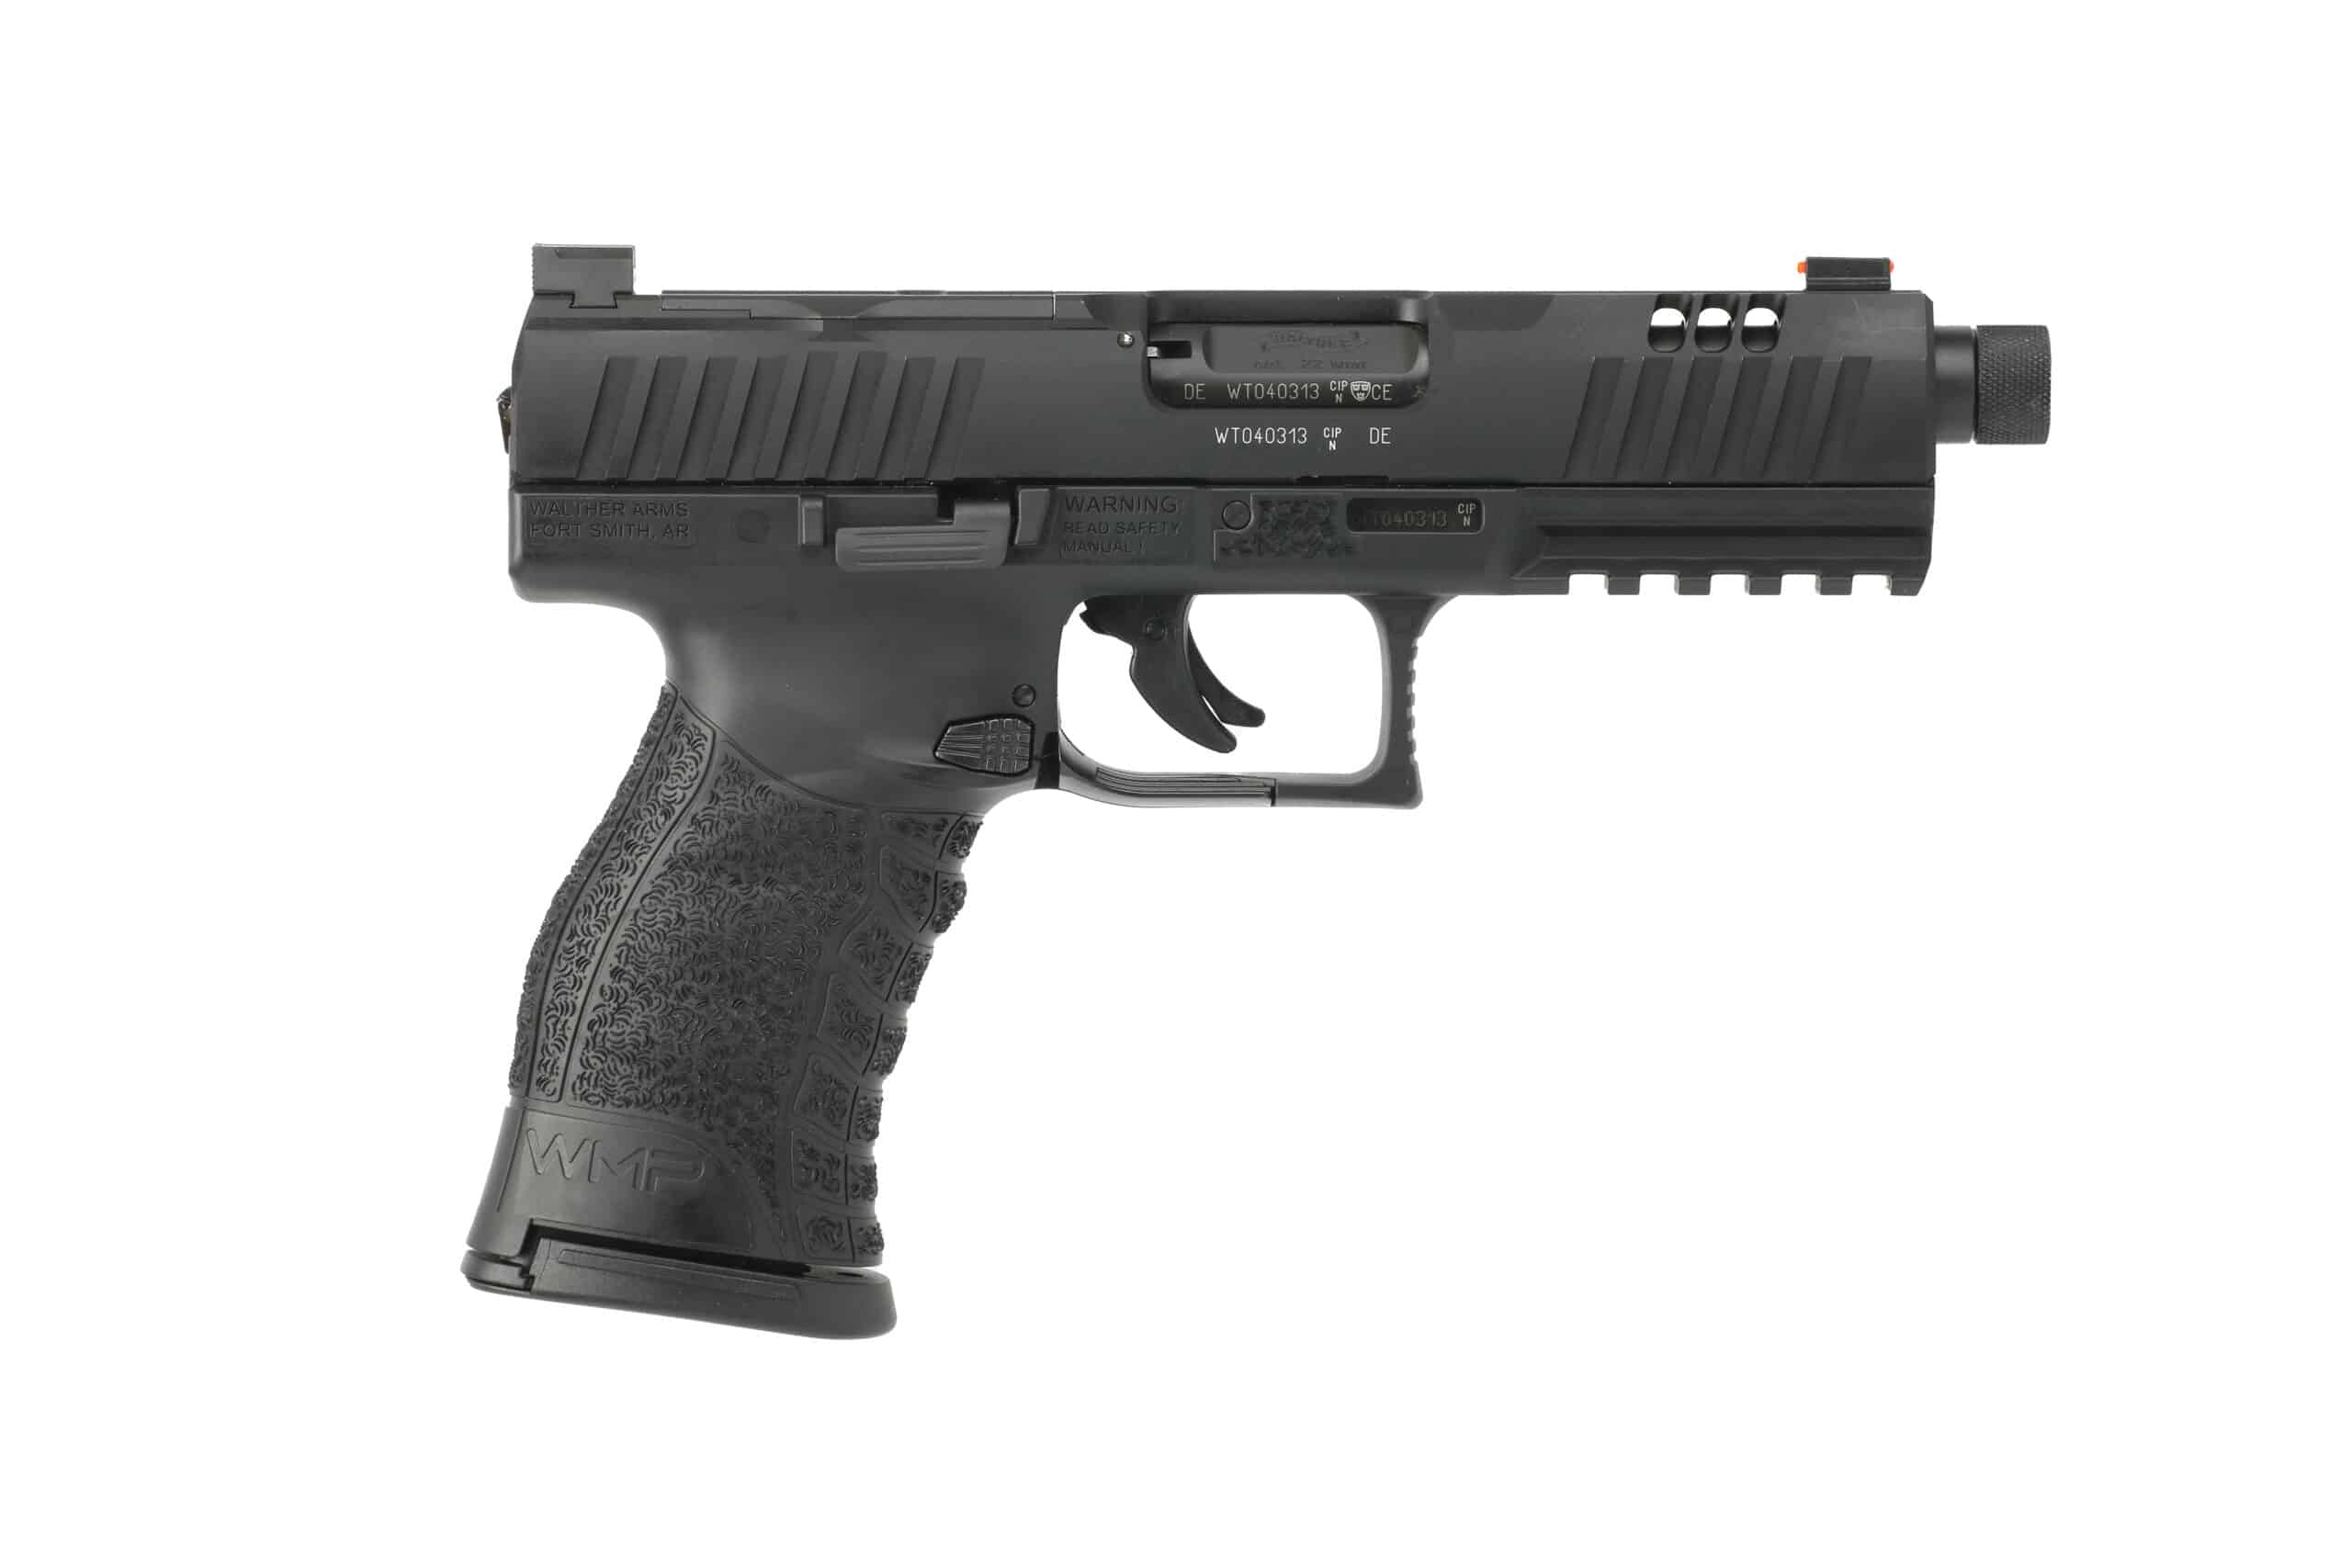 https://cityarsenal.com/product/walther-wmp-double-action-polymer-frame-pistol-22-winchester-magnum-4-9-threaded-barrel-matte-finish-black-5220301/